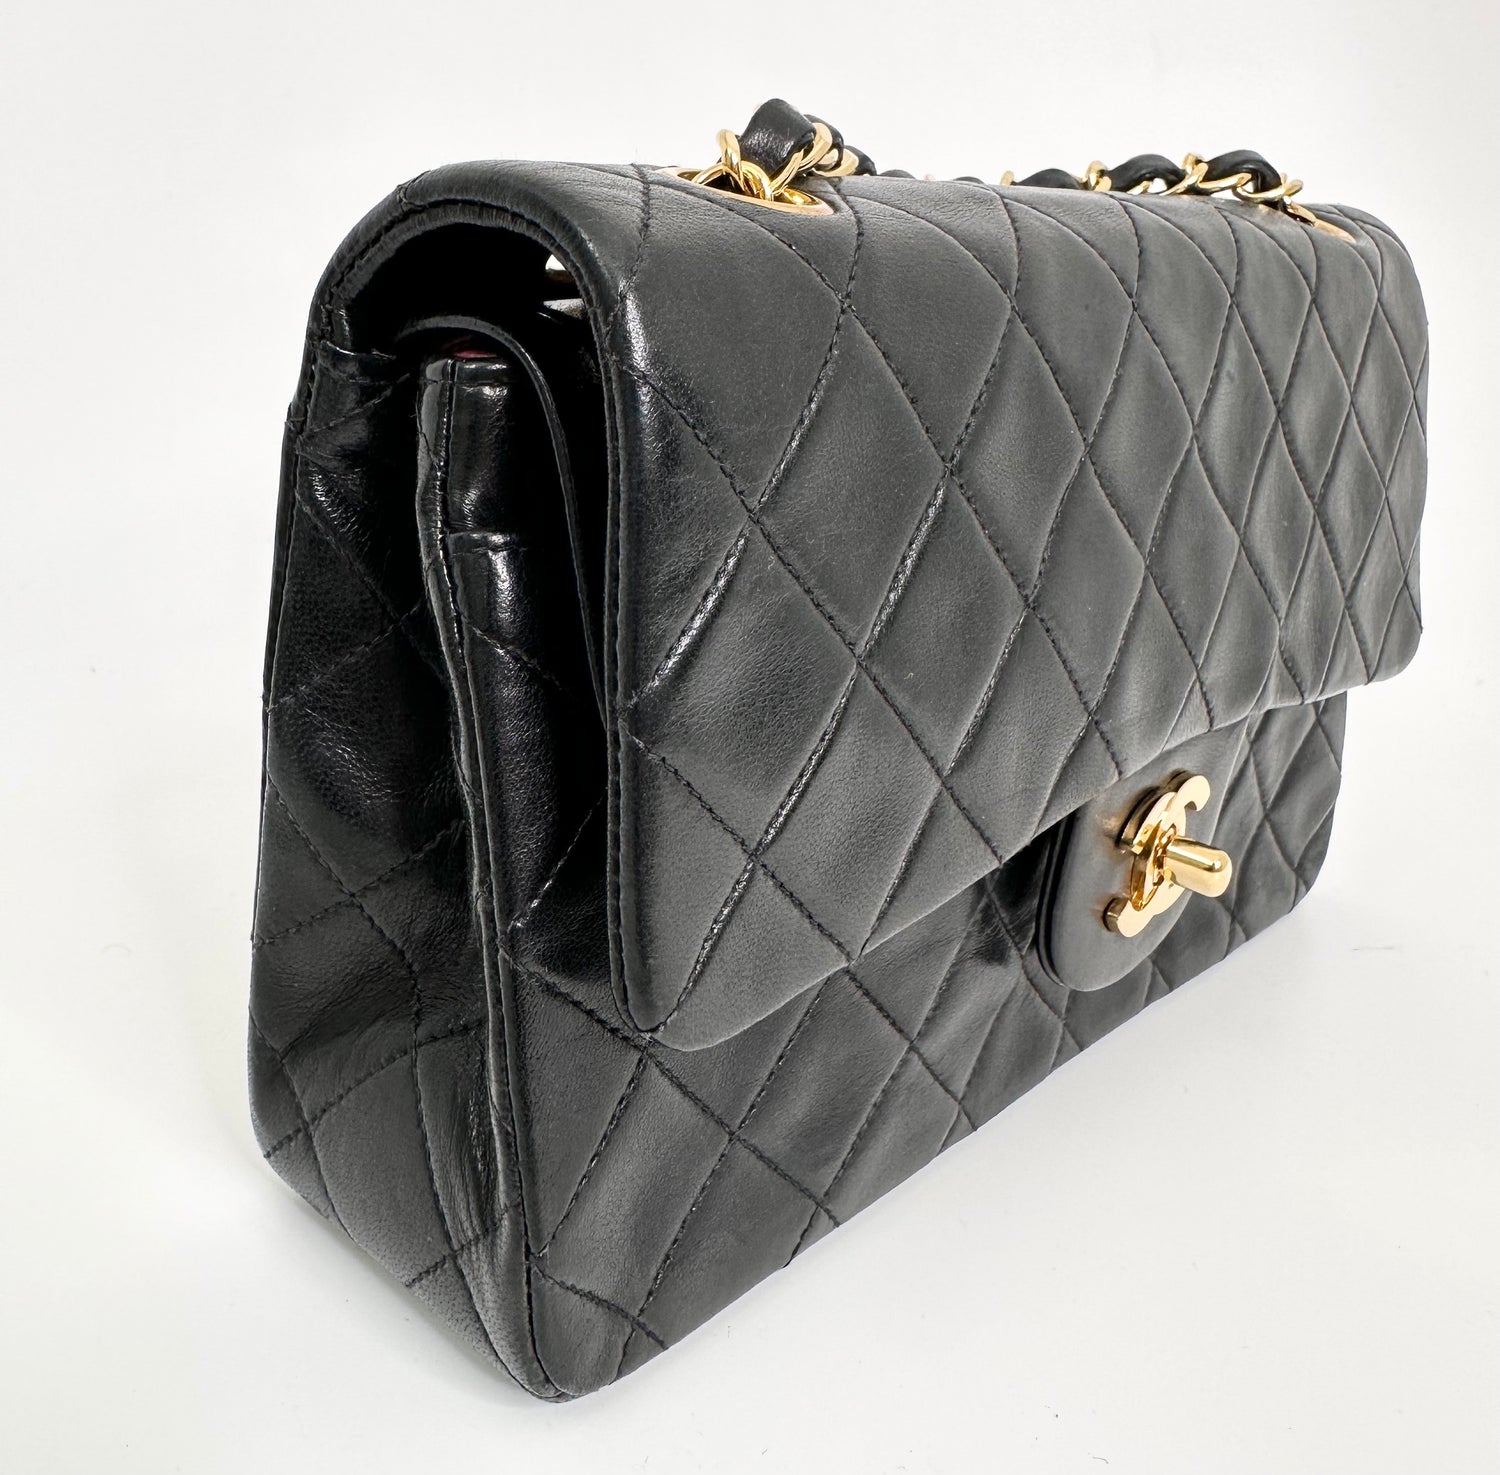 Chanel Black Paris Limited Edition Double Flap Bag with 24K Gold